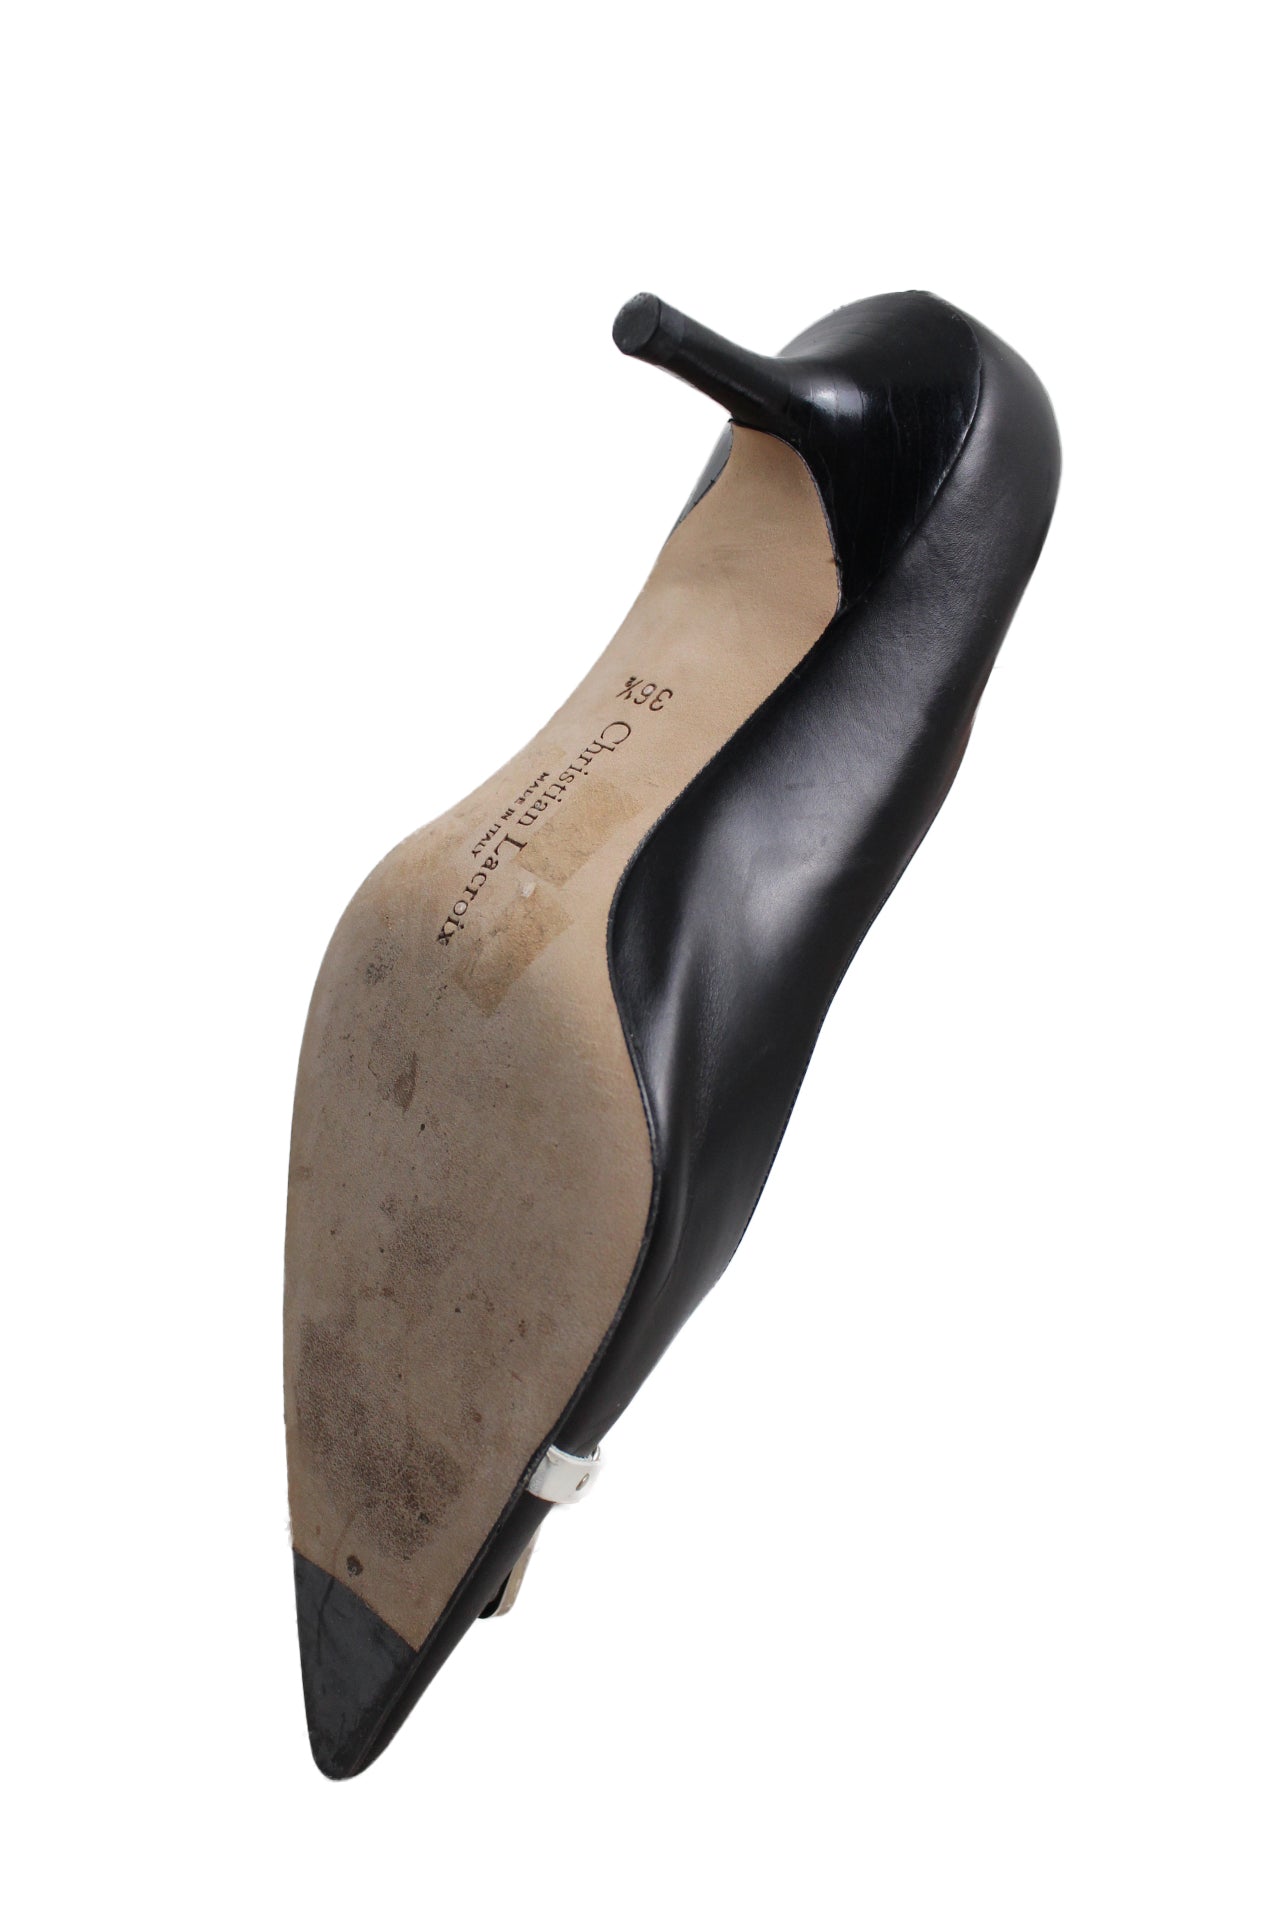 lower angle of kitten heels. features text '36 1/2, christian lacroix, made in italy'. 